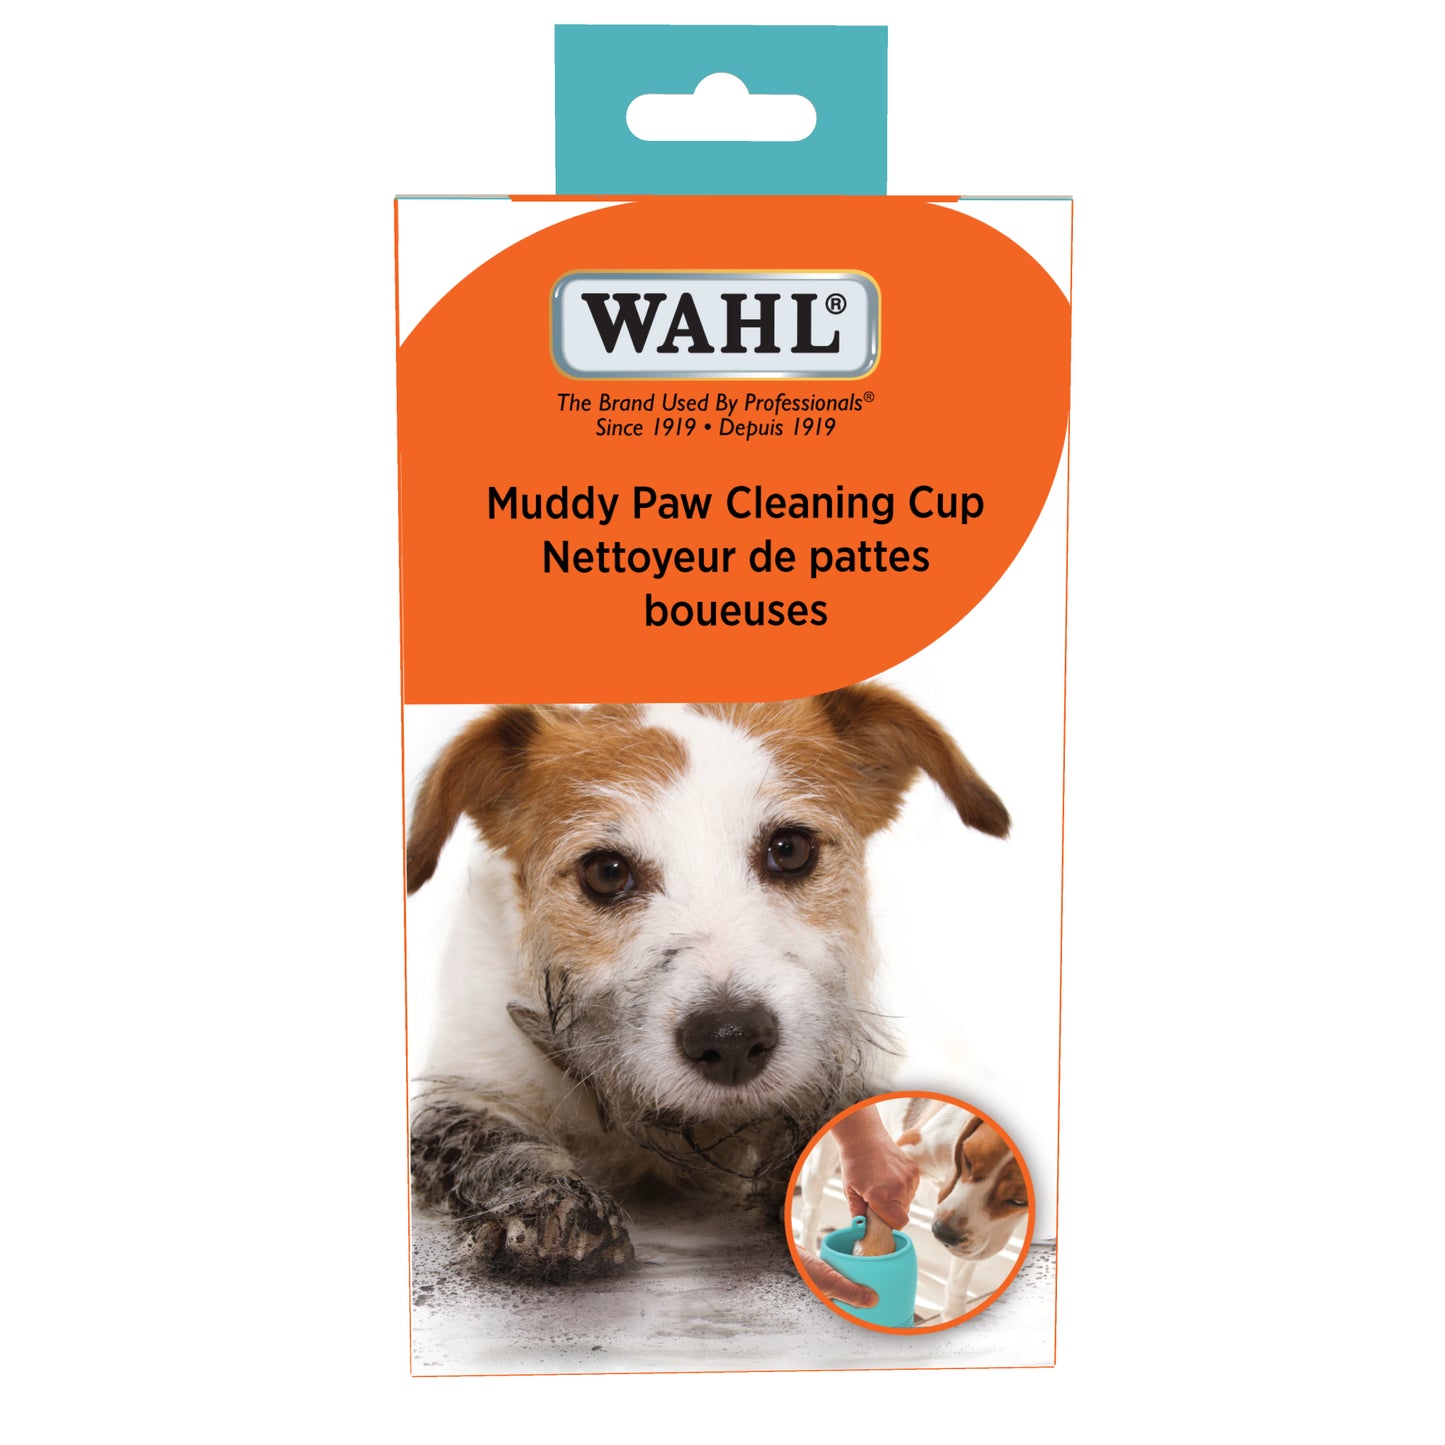 MUDDY PAW CLEANING CUP